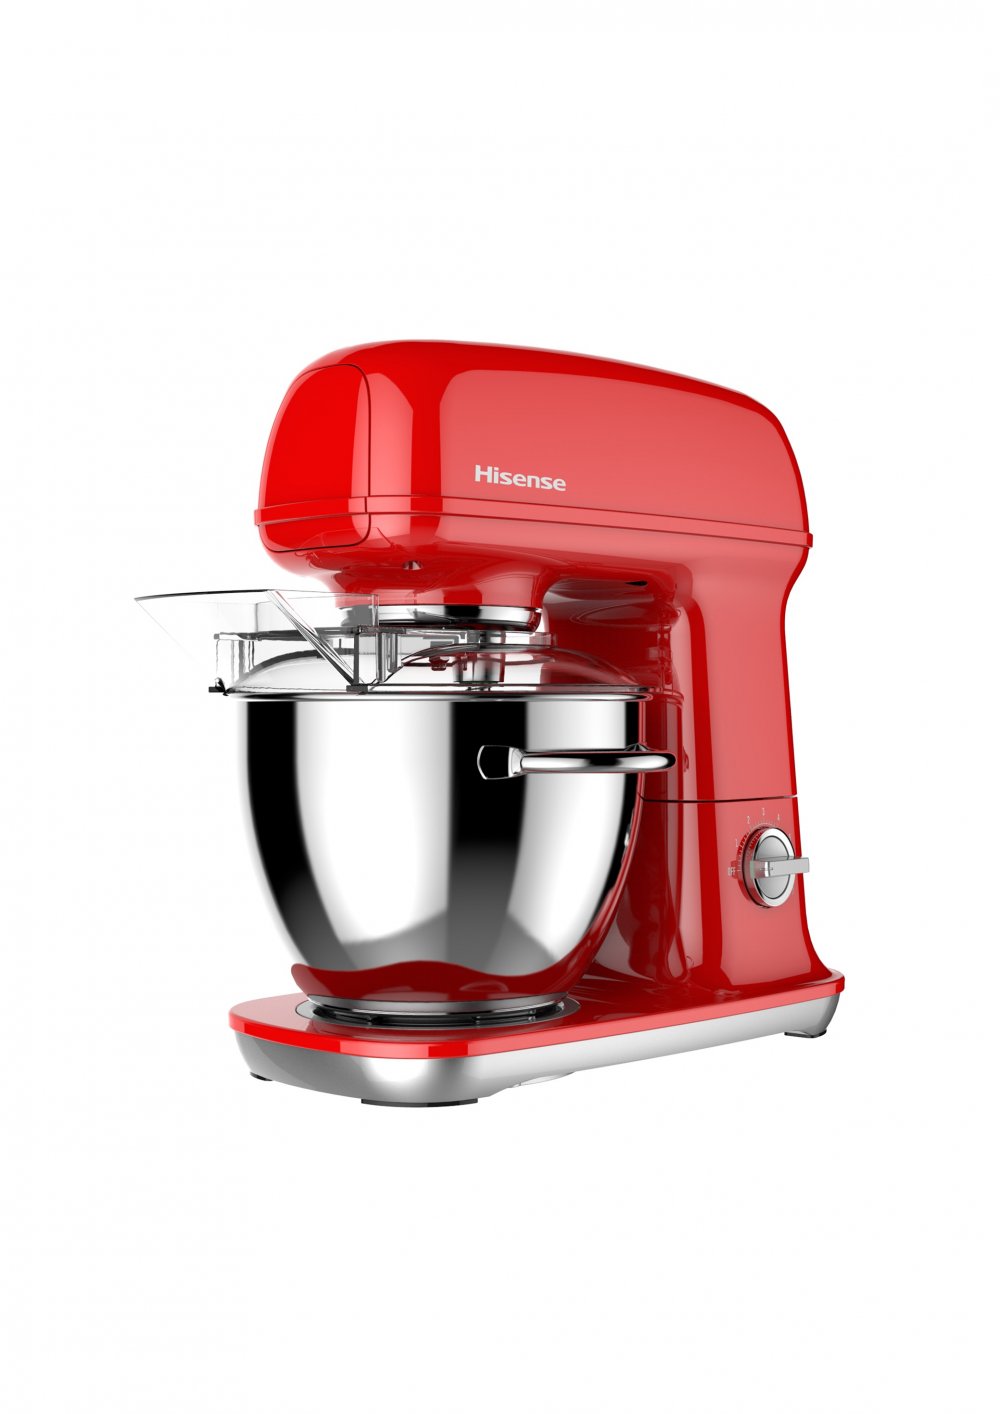 S/Mixer,1000W,4.5L-Red